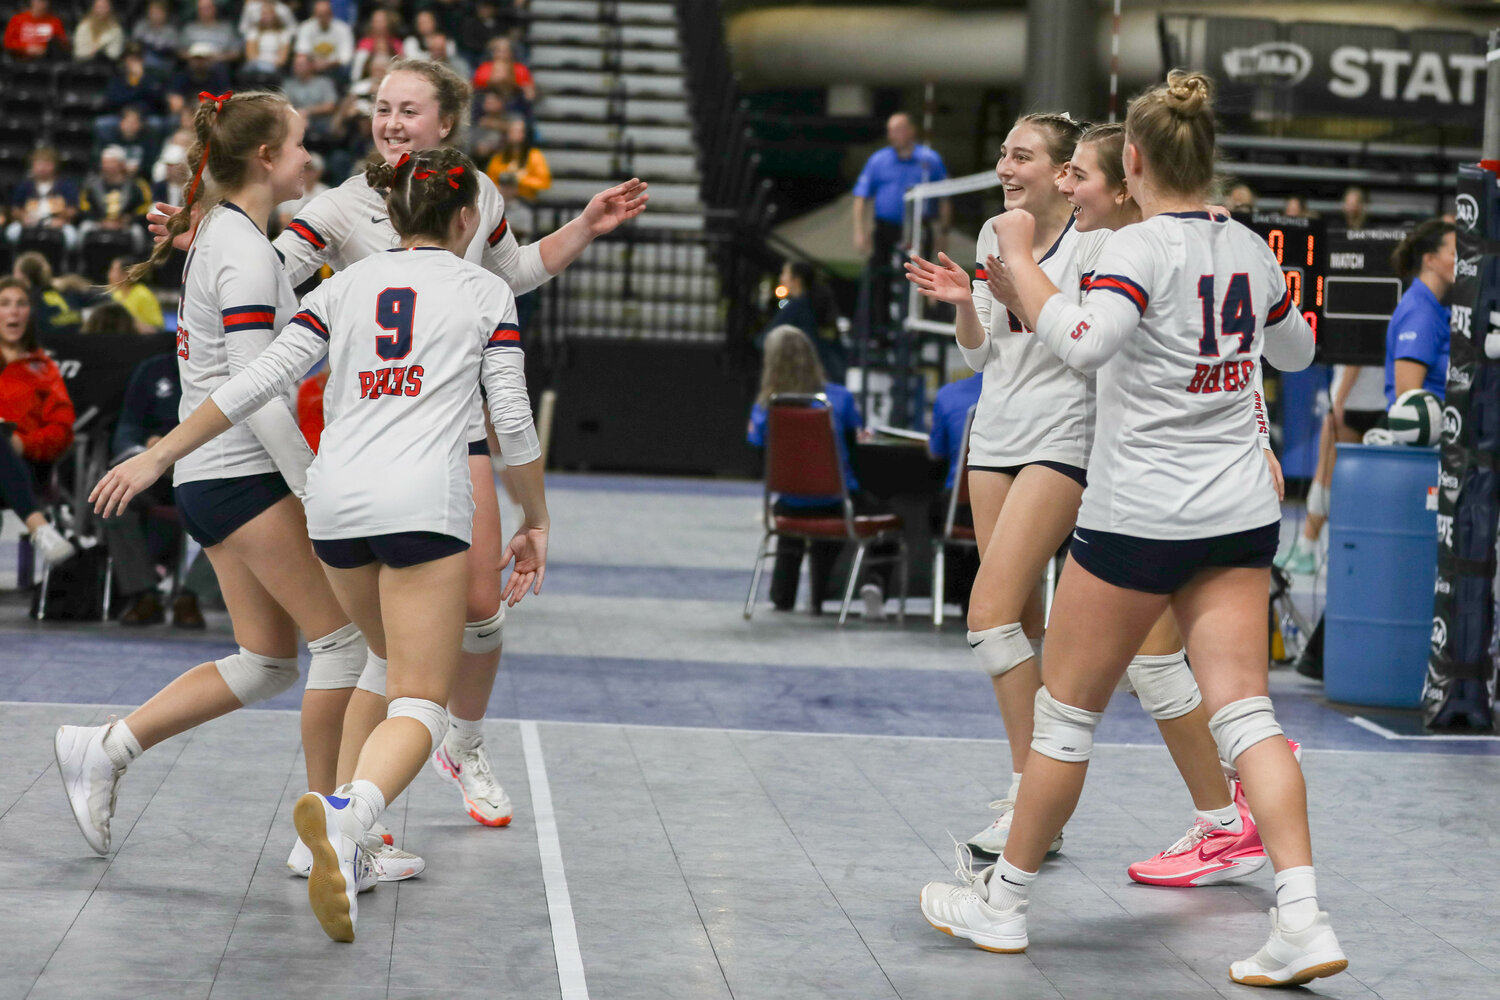 The Wolves celebrate after scoring a point during their first-round loss to White River at the state tournament on Nov. 10 in Yakima.